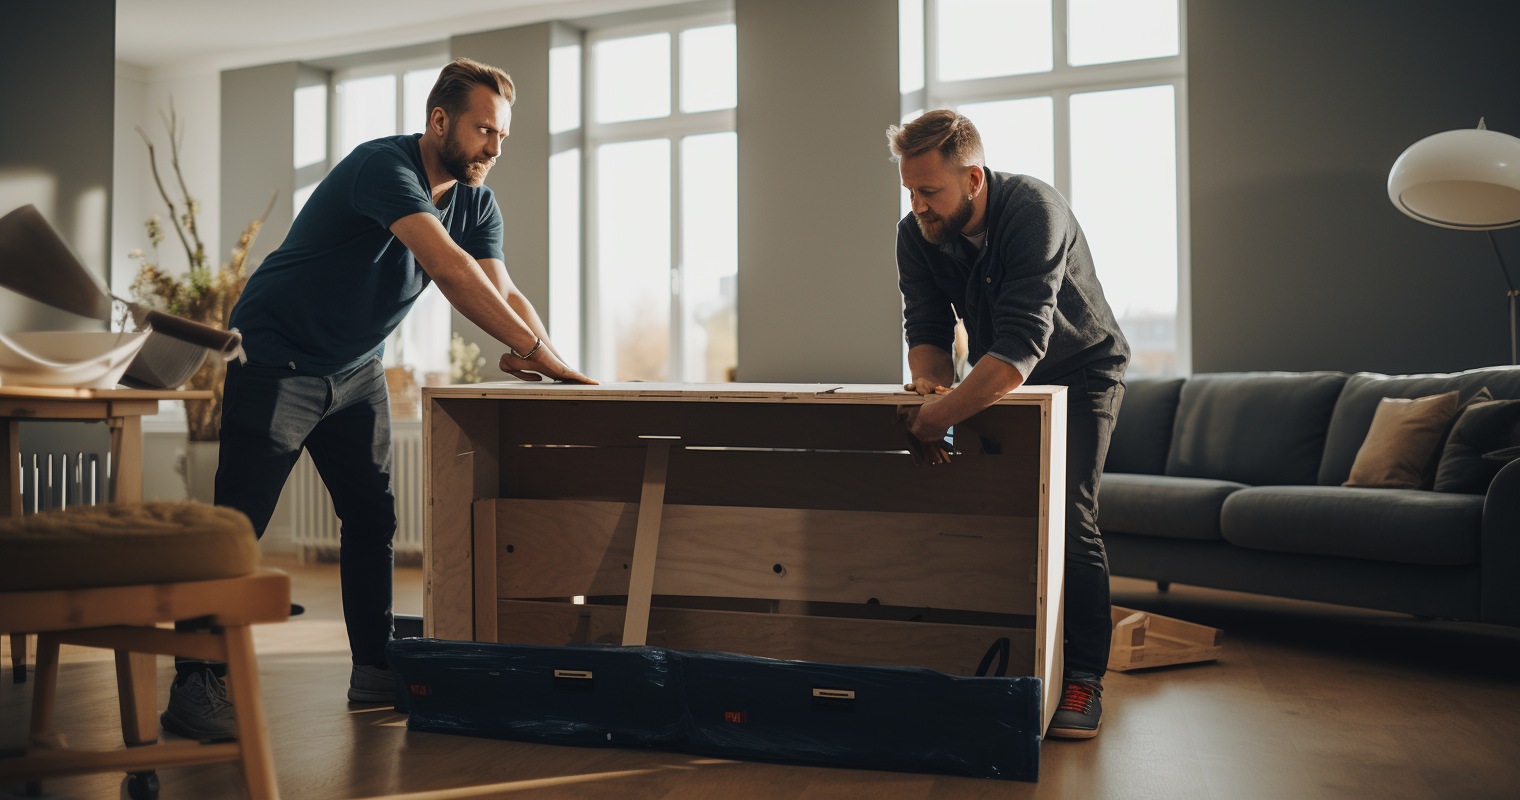 Two movers assembling a disassembled furniture piece